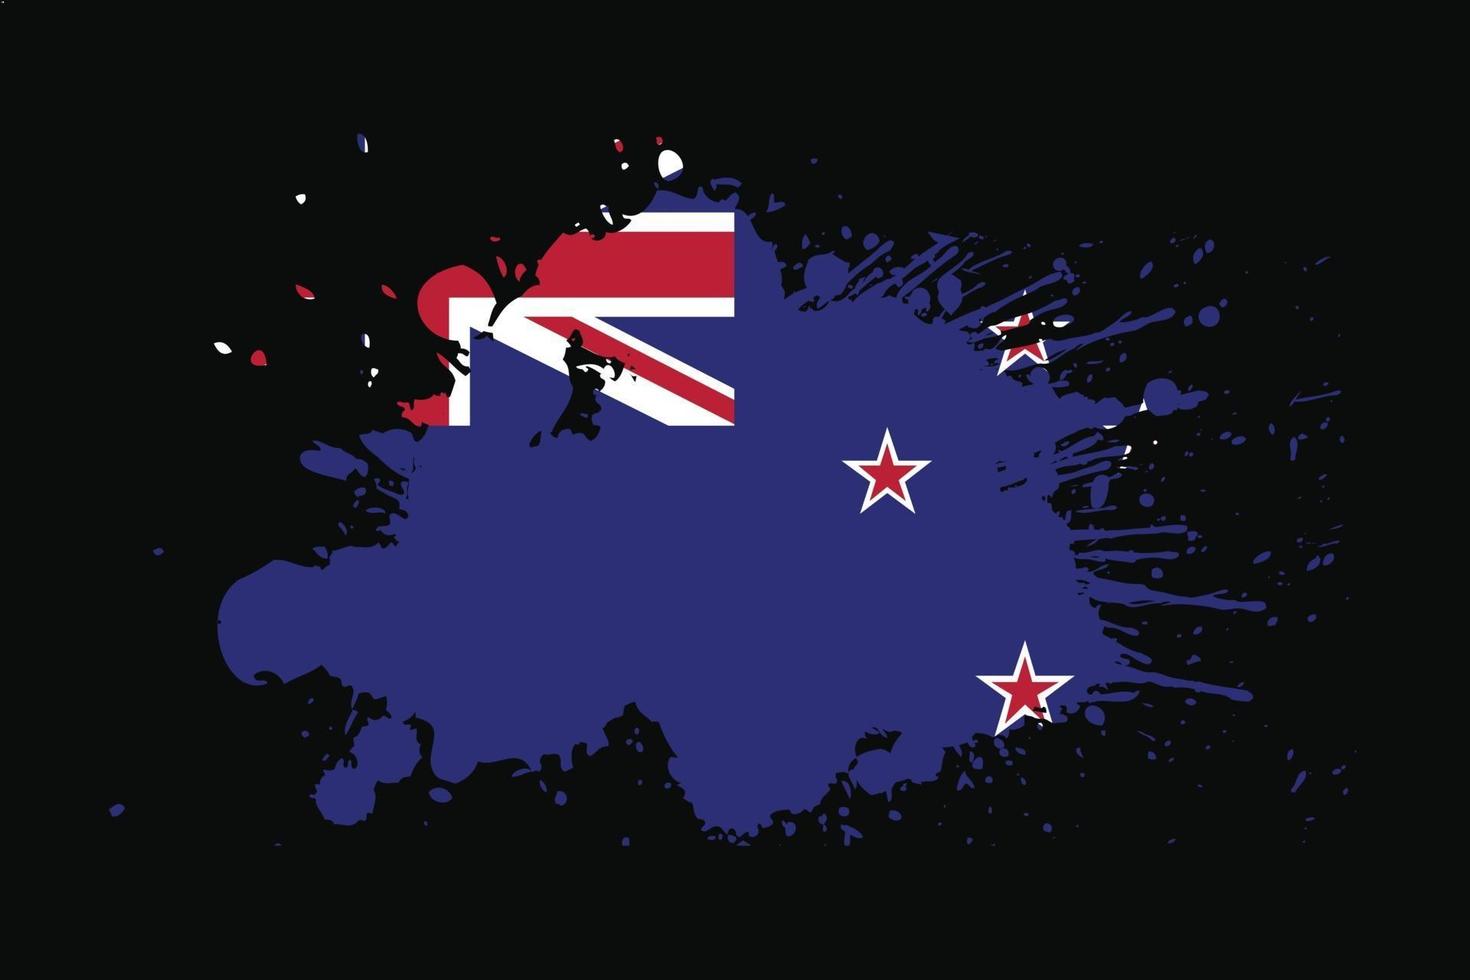 New Zealand Flag With Grunge Effect Design vector